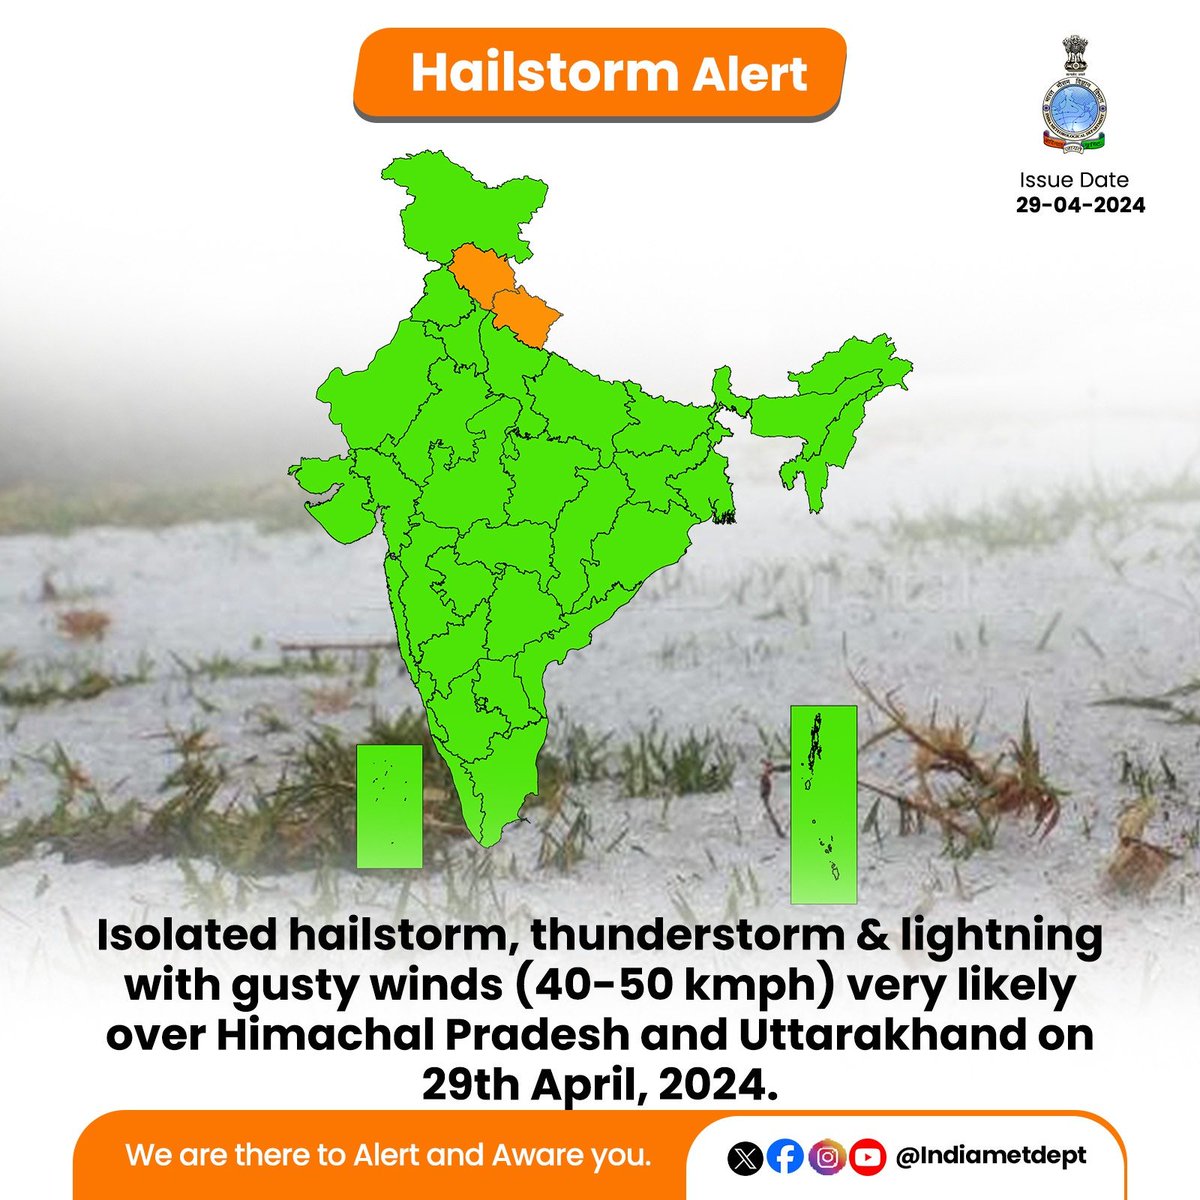 Isolated hailstorm, thunderstorm & lightning with gusty winds (40-50 kmph) very likely over Himachal Pradesh and Uttarakhand on 29th April, 2024. #WeatherUpdate #HailstormAlert @moesgoi @DDNewslive @ndmaindia @airnewsalerts